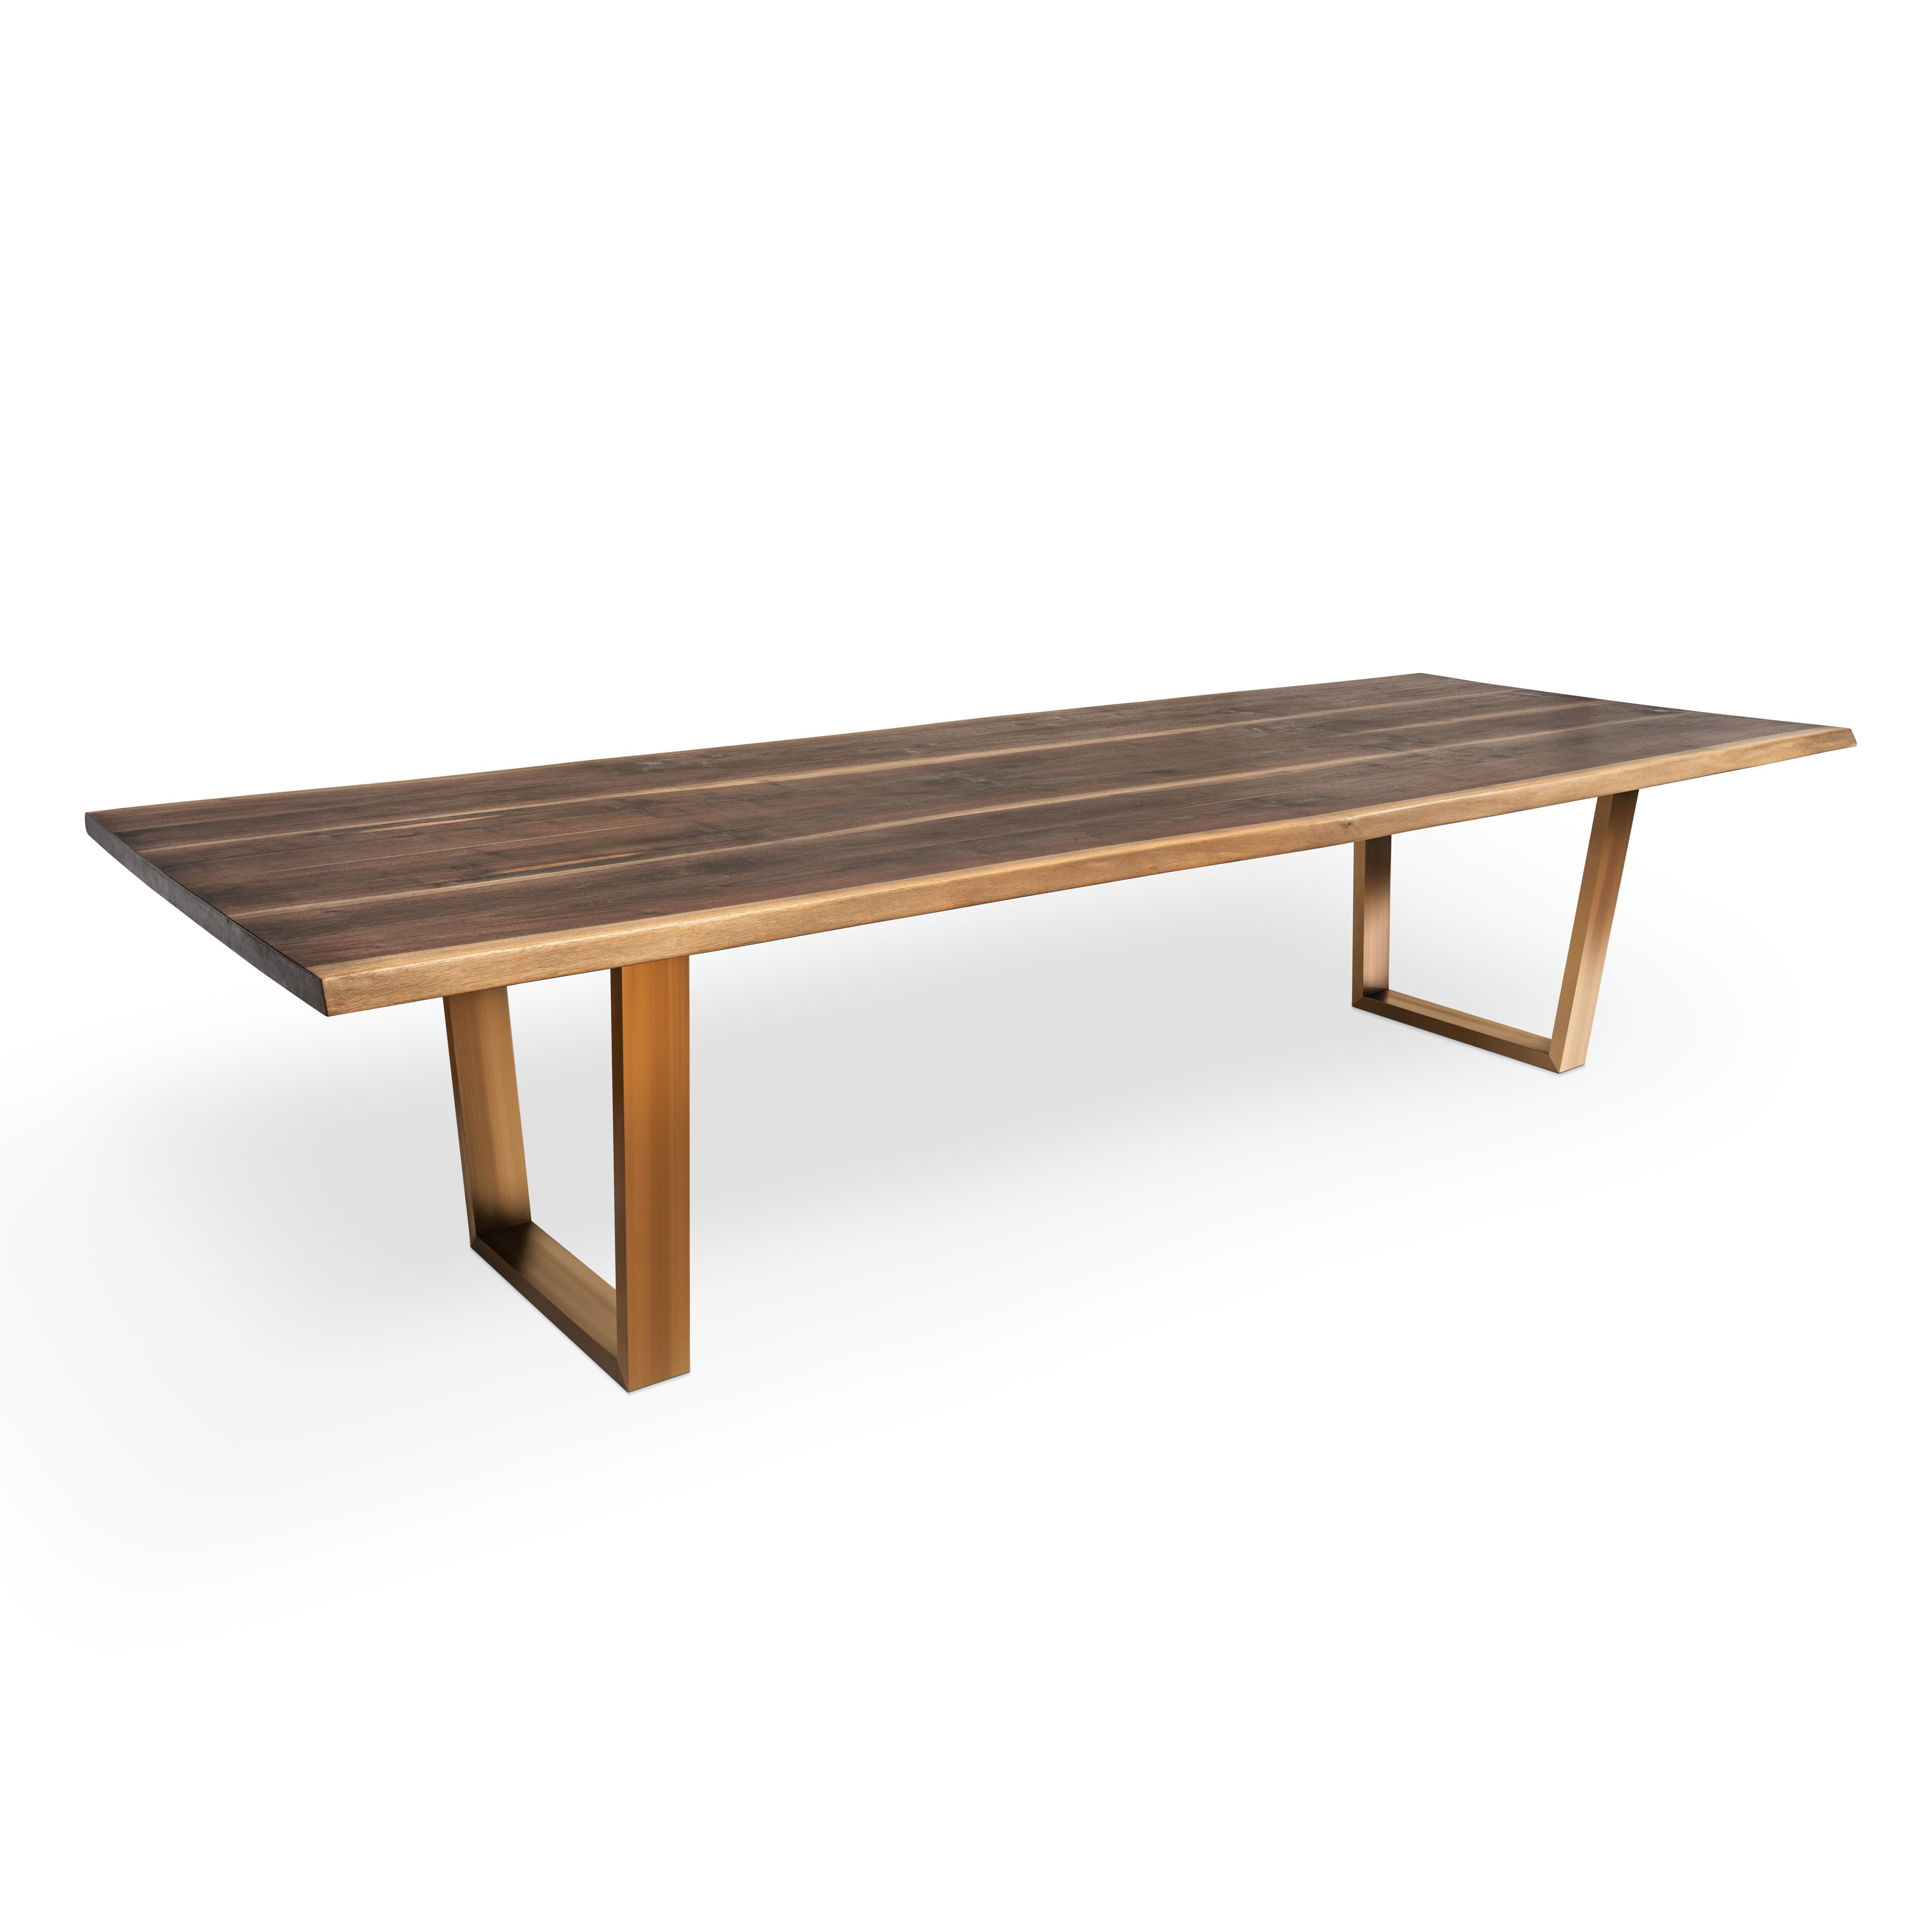 N.16 Dining Table by Timbart
Dimensions: D 130 x W 320 x H 75 cm
Material: Solid american walnut wood, copper, Timbart reactive stain.

Timbart is a woodworking atelier from Hungary - specialising in hardwood flooring, cutom-made furniture, and